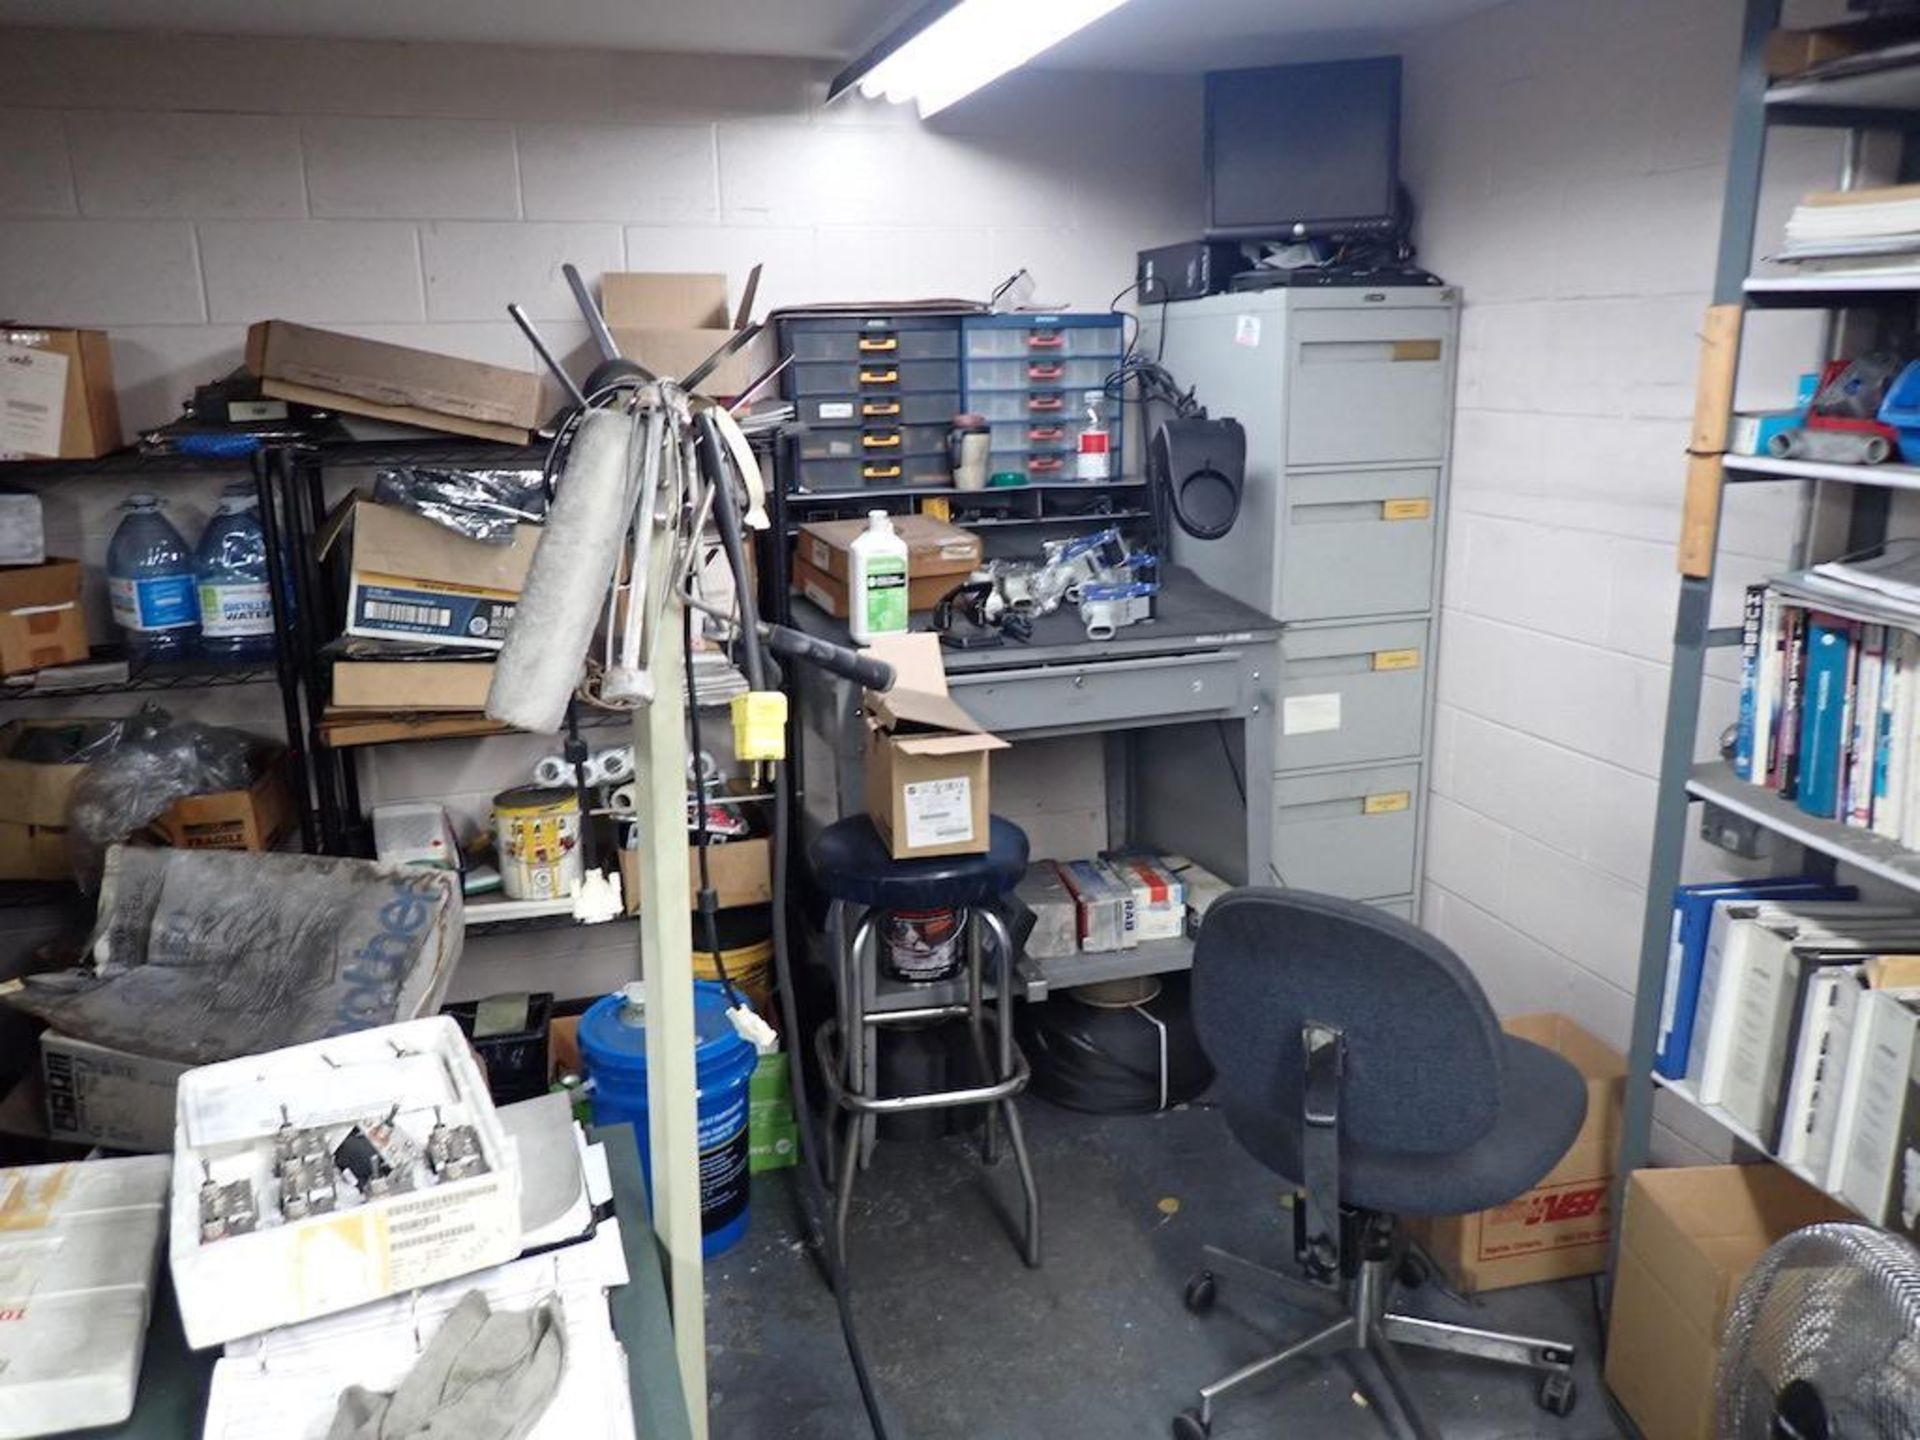 PRODUCTION OFFICE CONTENTS: DESK, CABINETS, SHELVES, SHIPPING DESK, CHAIRTS, TONER, COMPONENTS, BOAR - Image 5 of 7